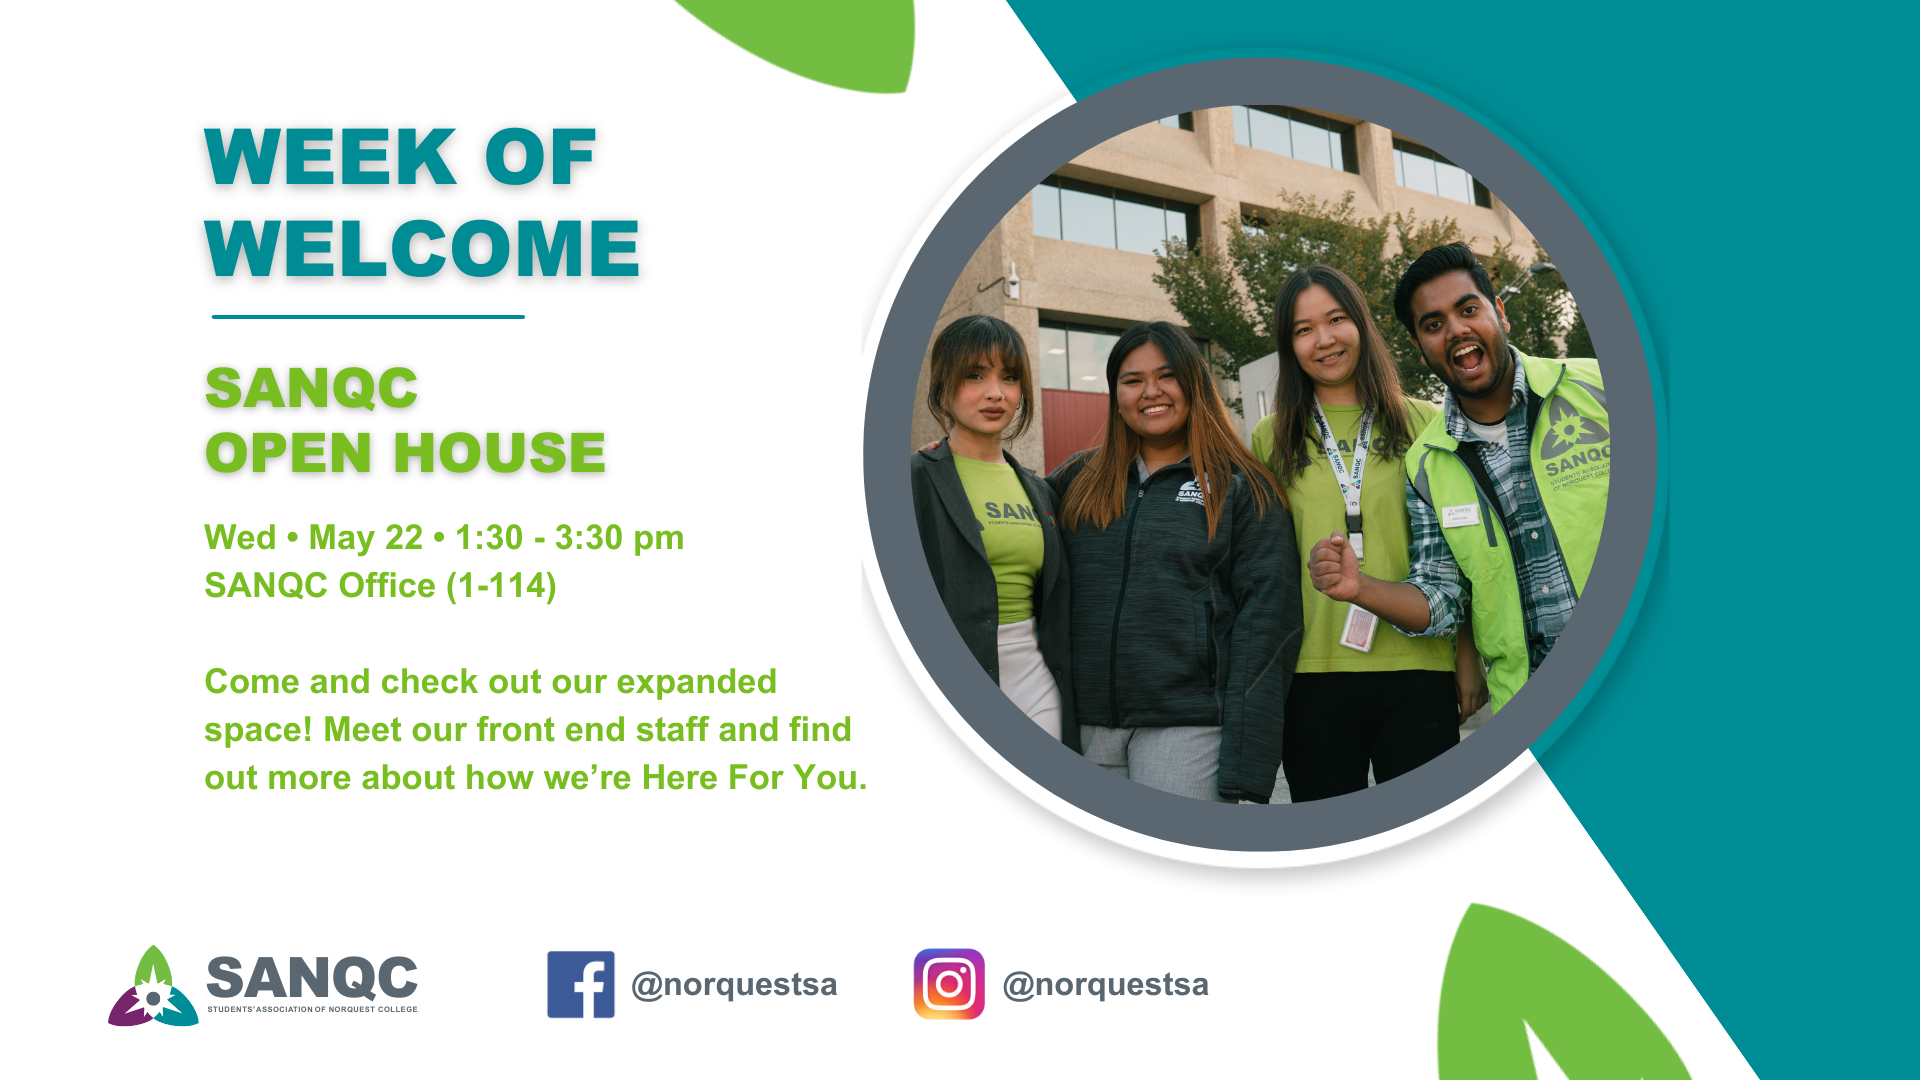 Week of Welcome: SANQC Open House